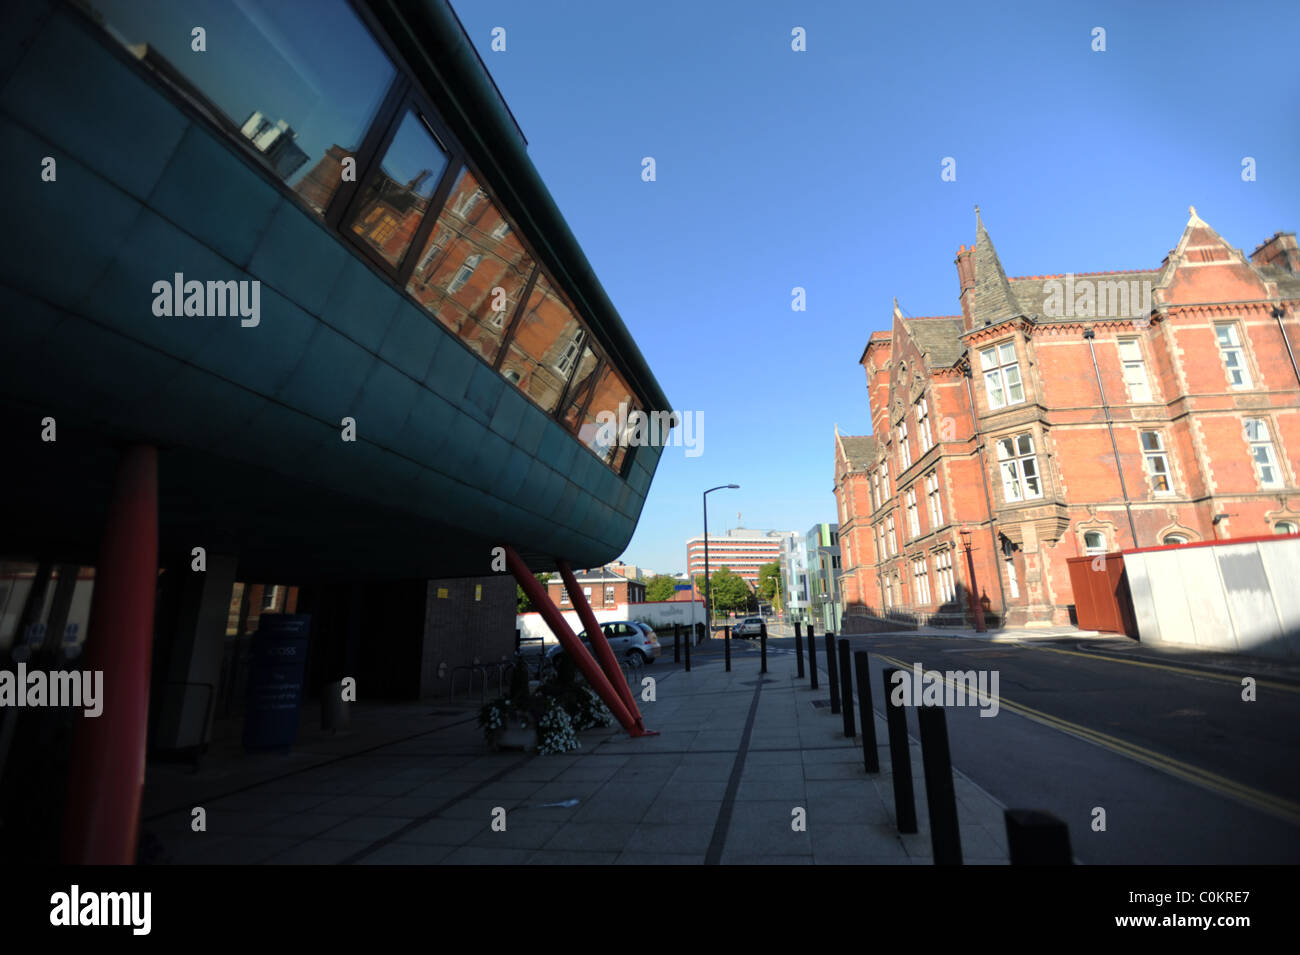 Modern architectural buildings on Sheffield University Campus Stock Photo